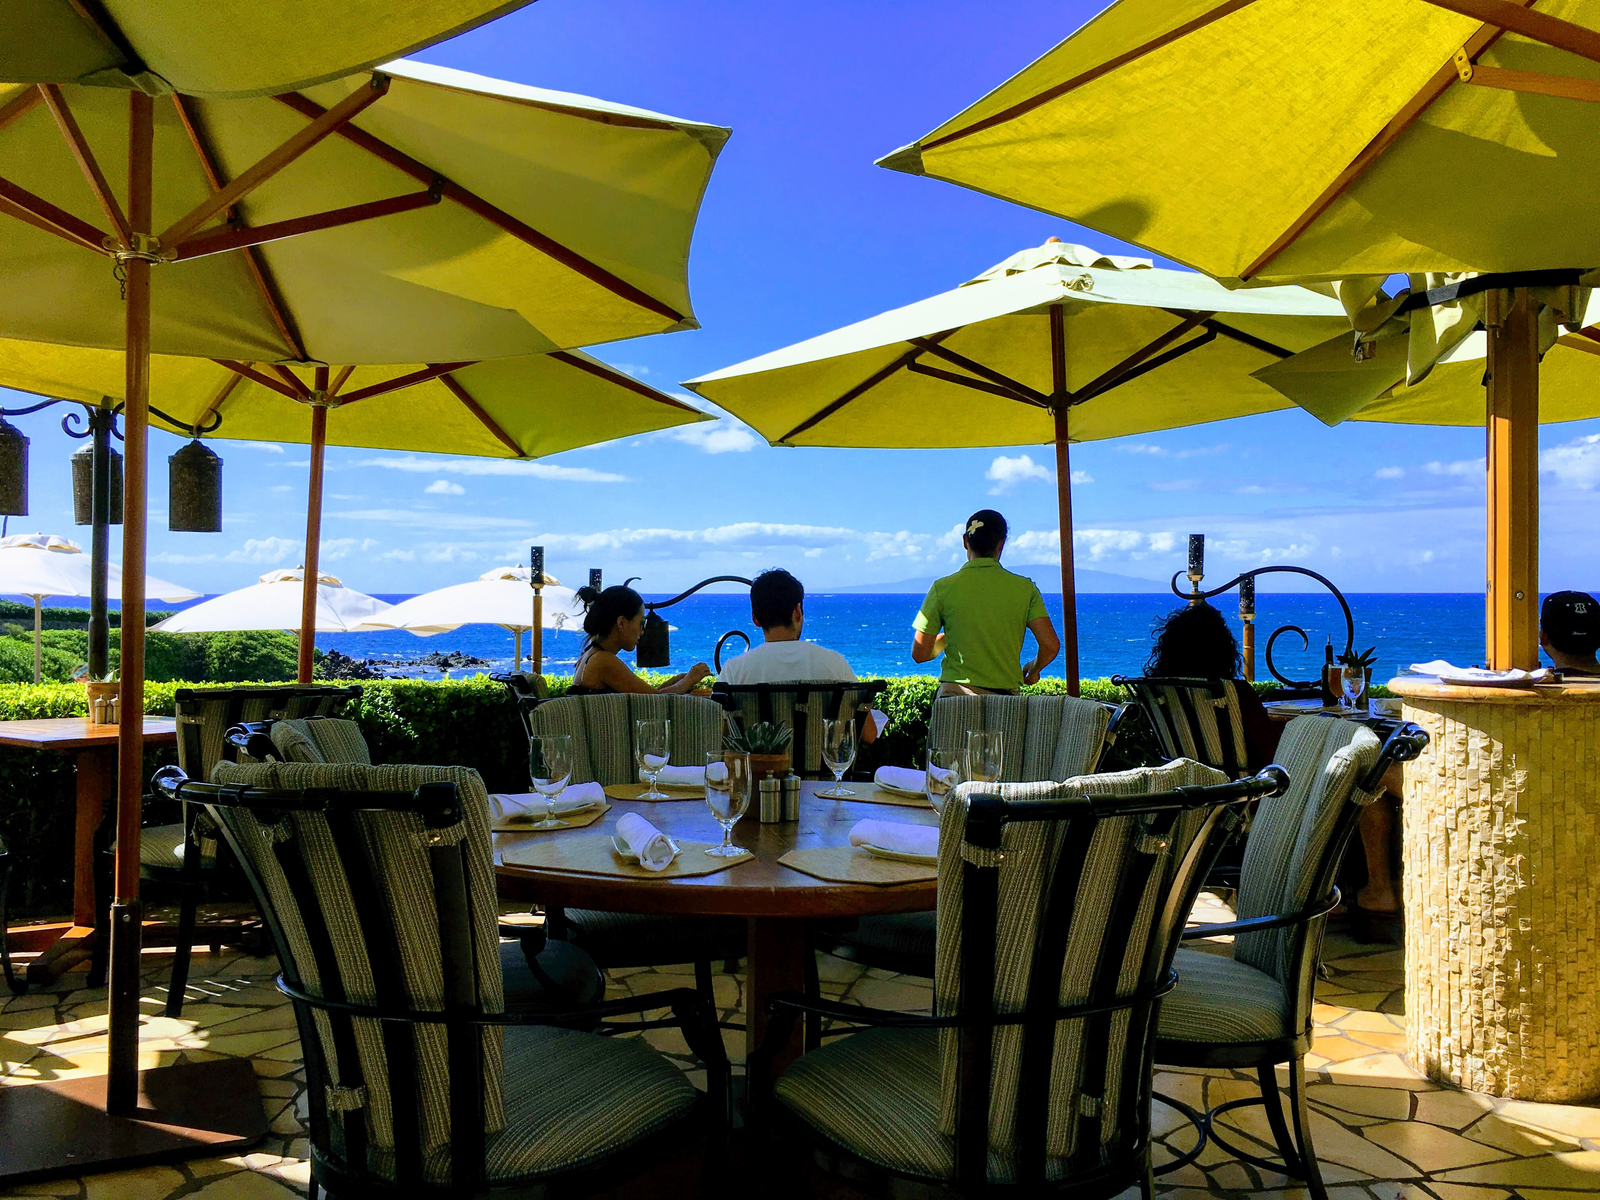 Visitors having a lovely lunch in a tropical beach under yellow patio umbrellas at one of the best restaurants in Kona, Hawaii